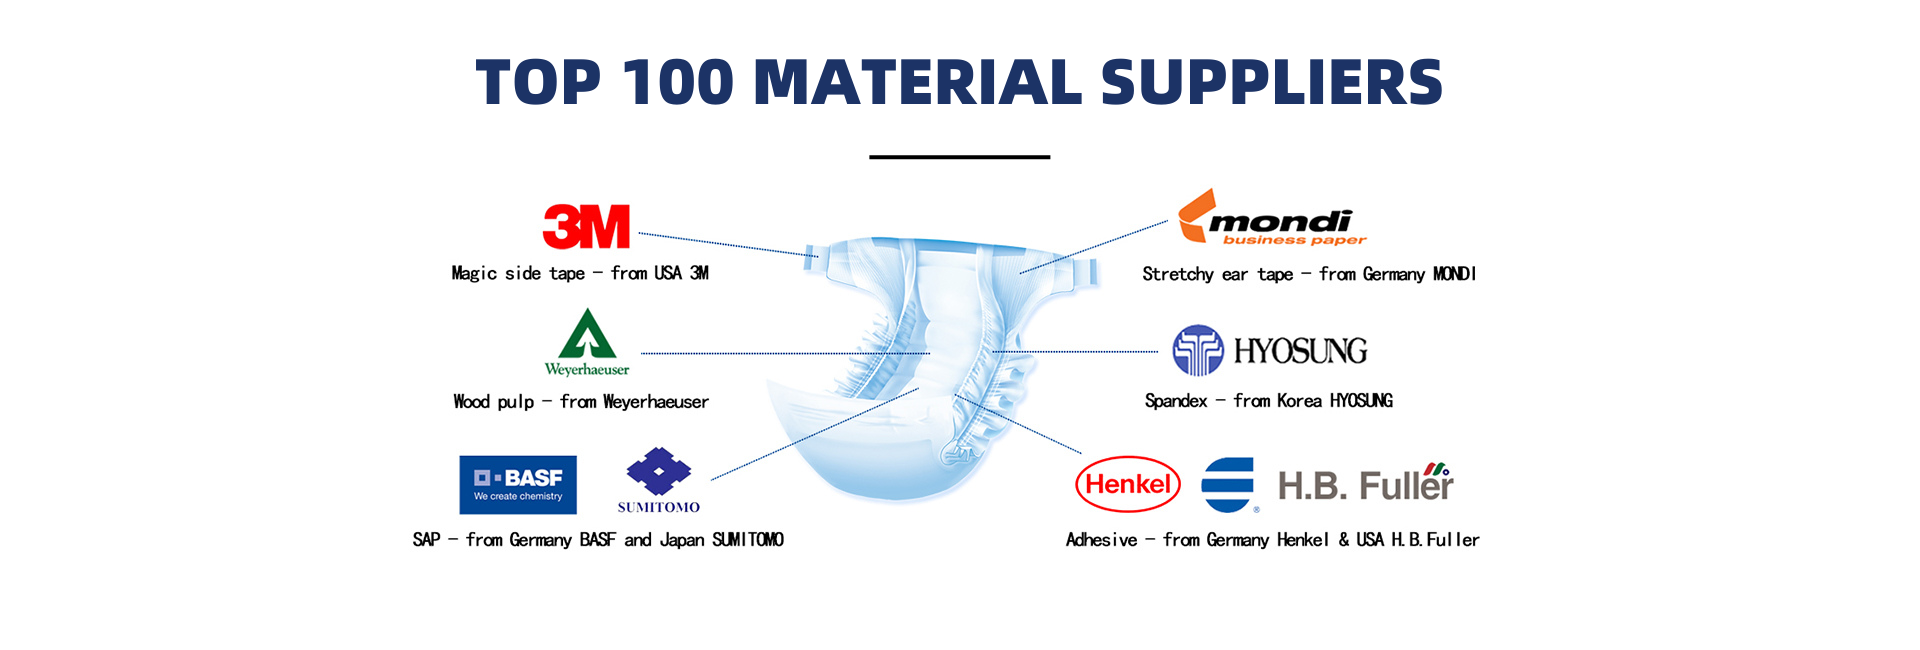 Material Suppliers